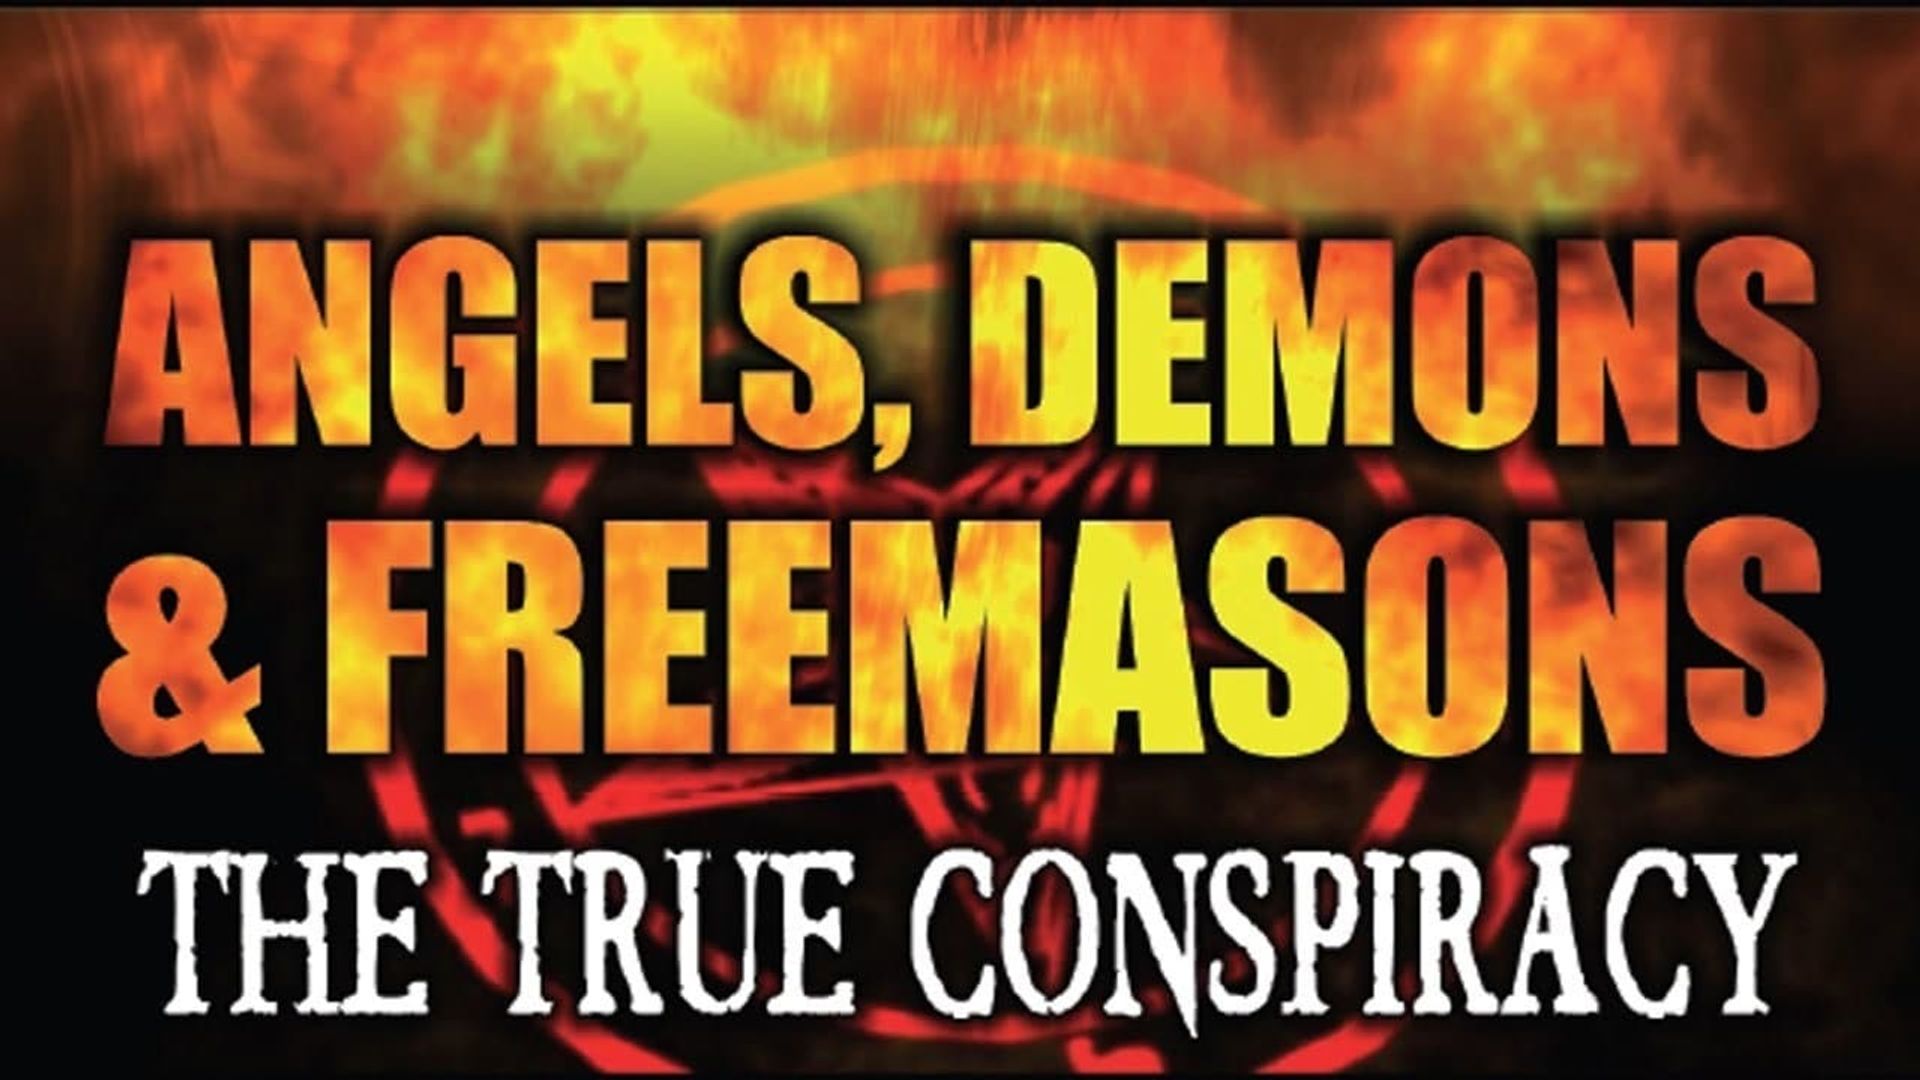 Angels, Demons and Freemasons: The True Conspiracy background